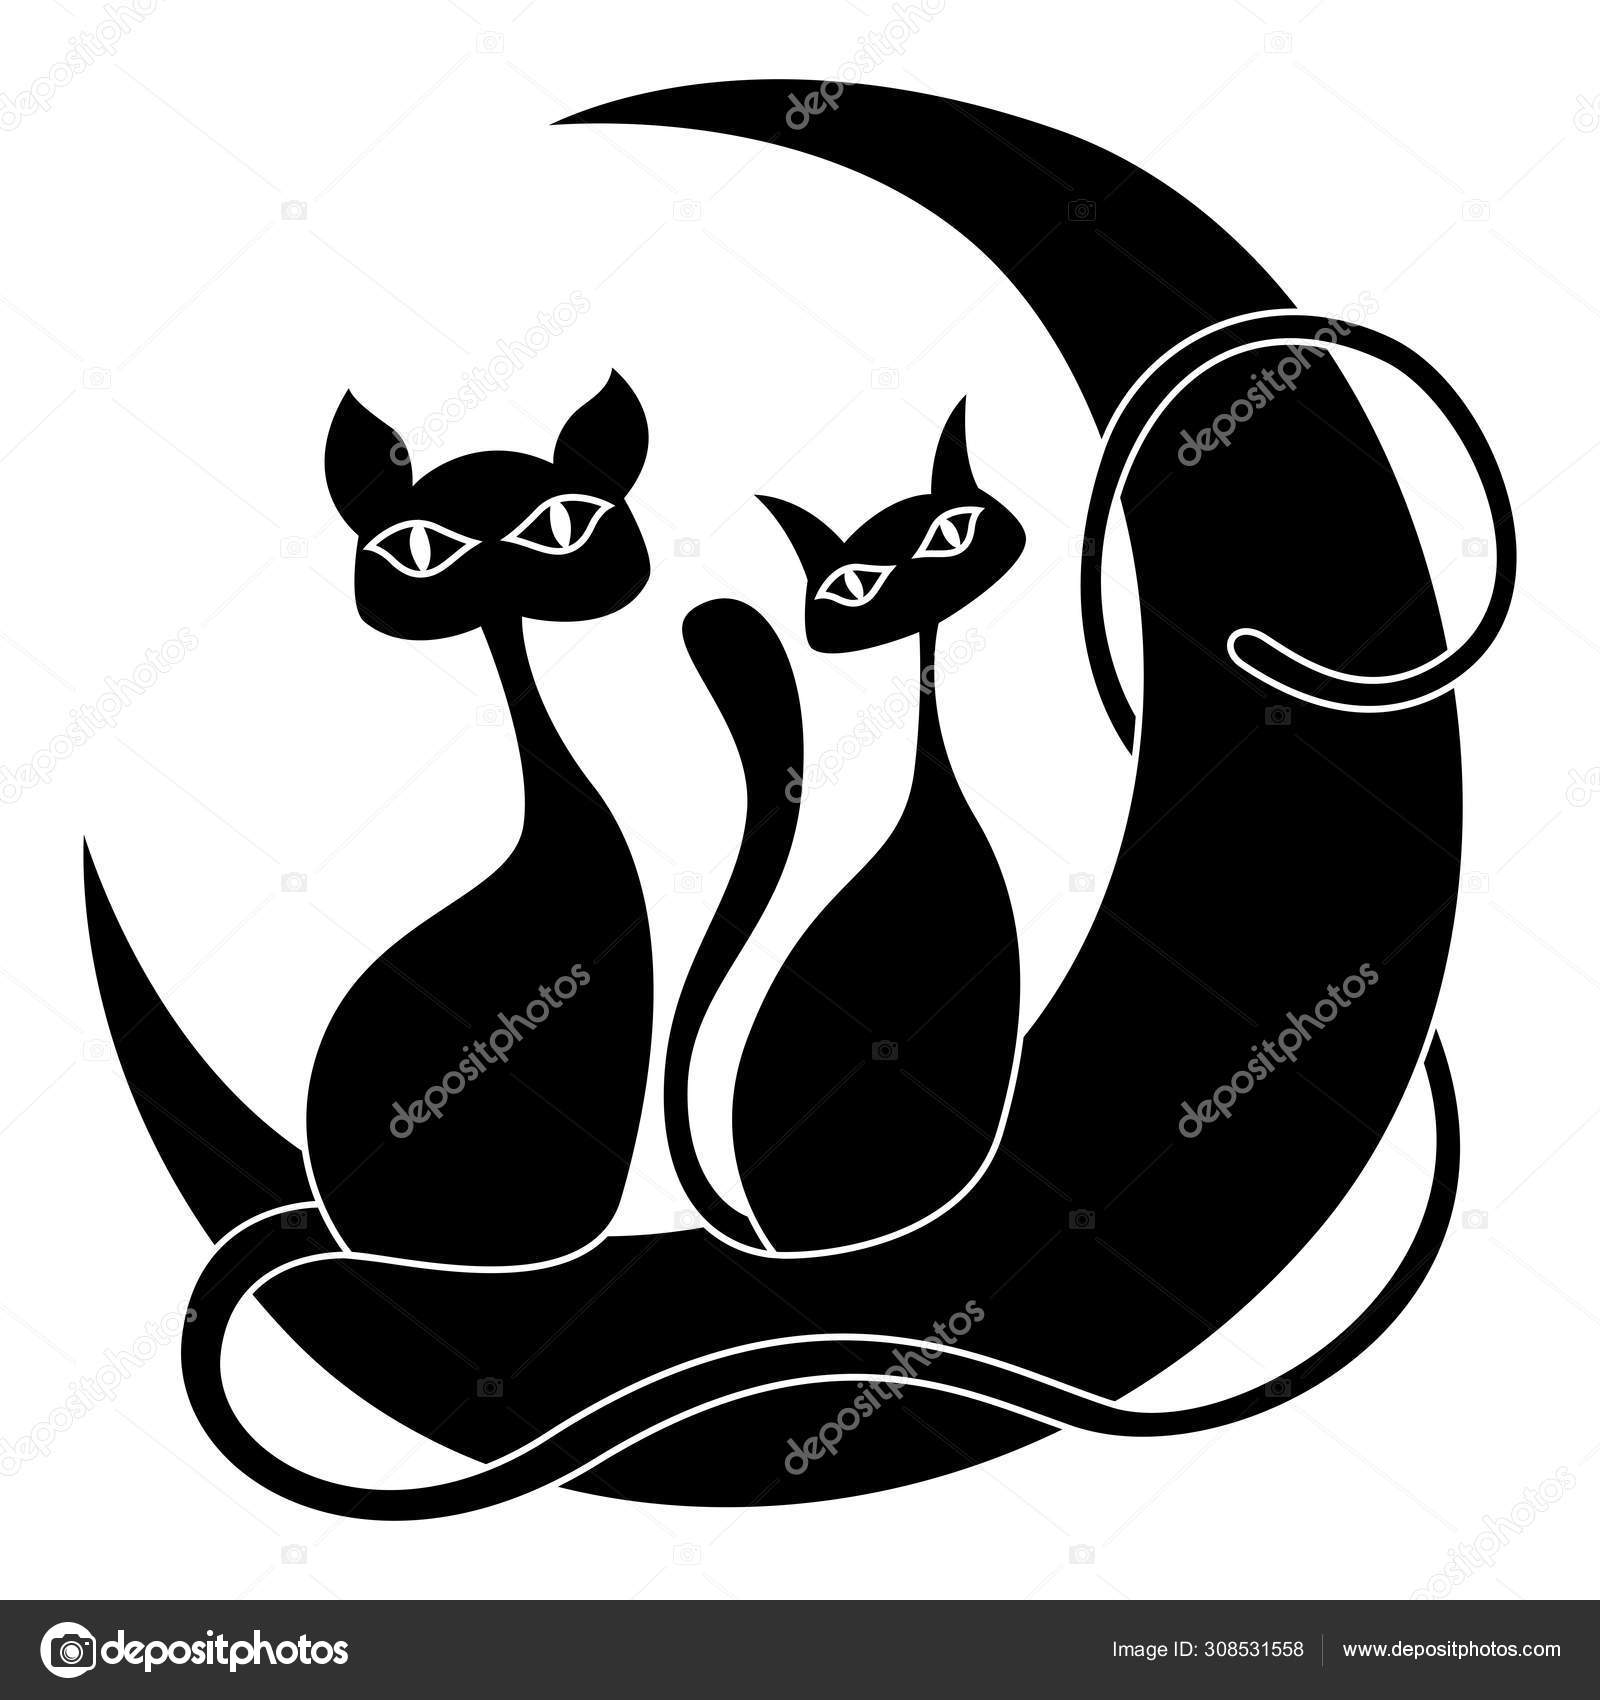 Silhouette of Two Cats with Tails Intertwined in Heart Shape